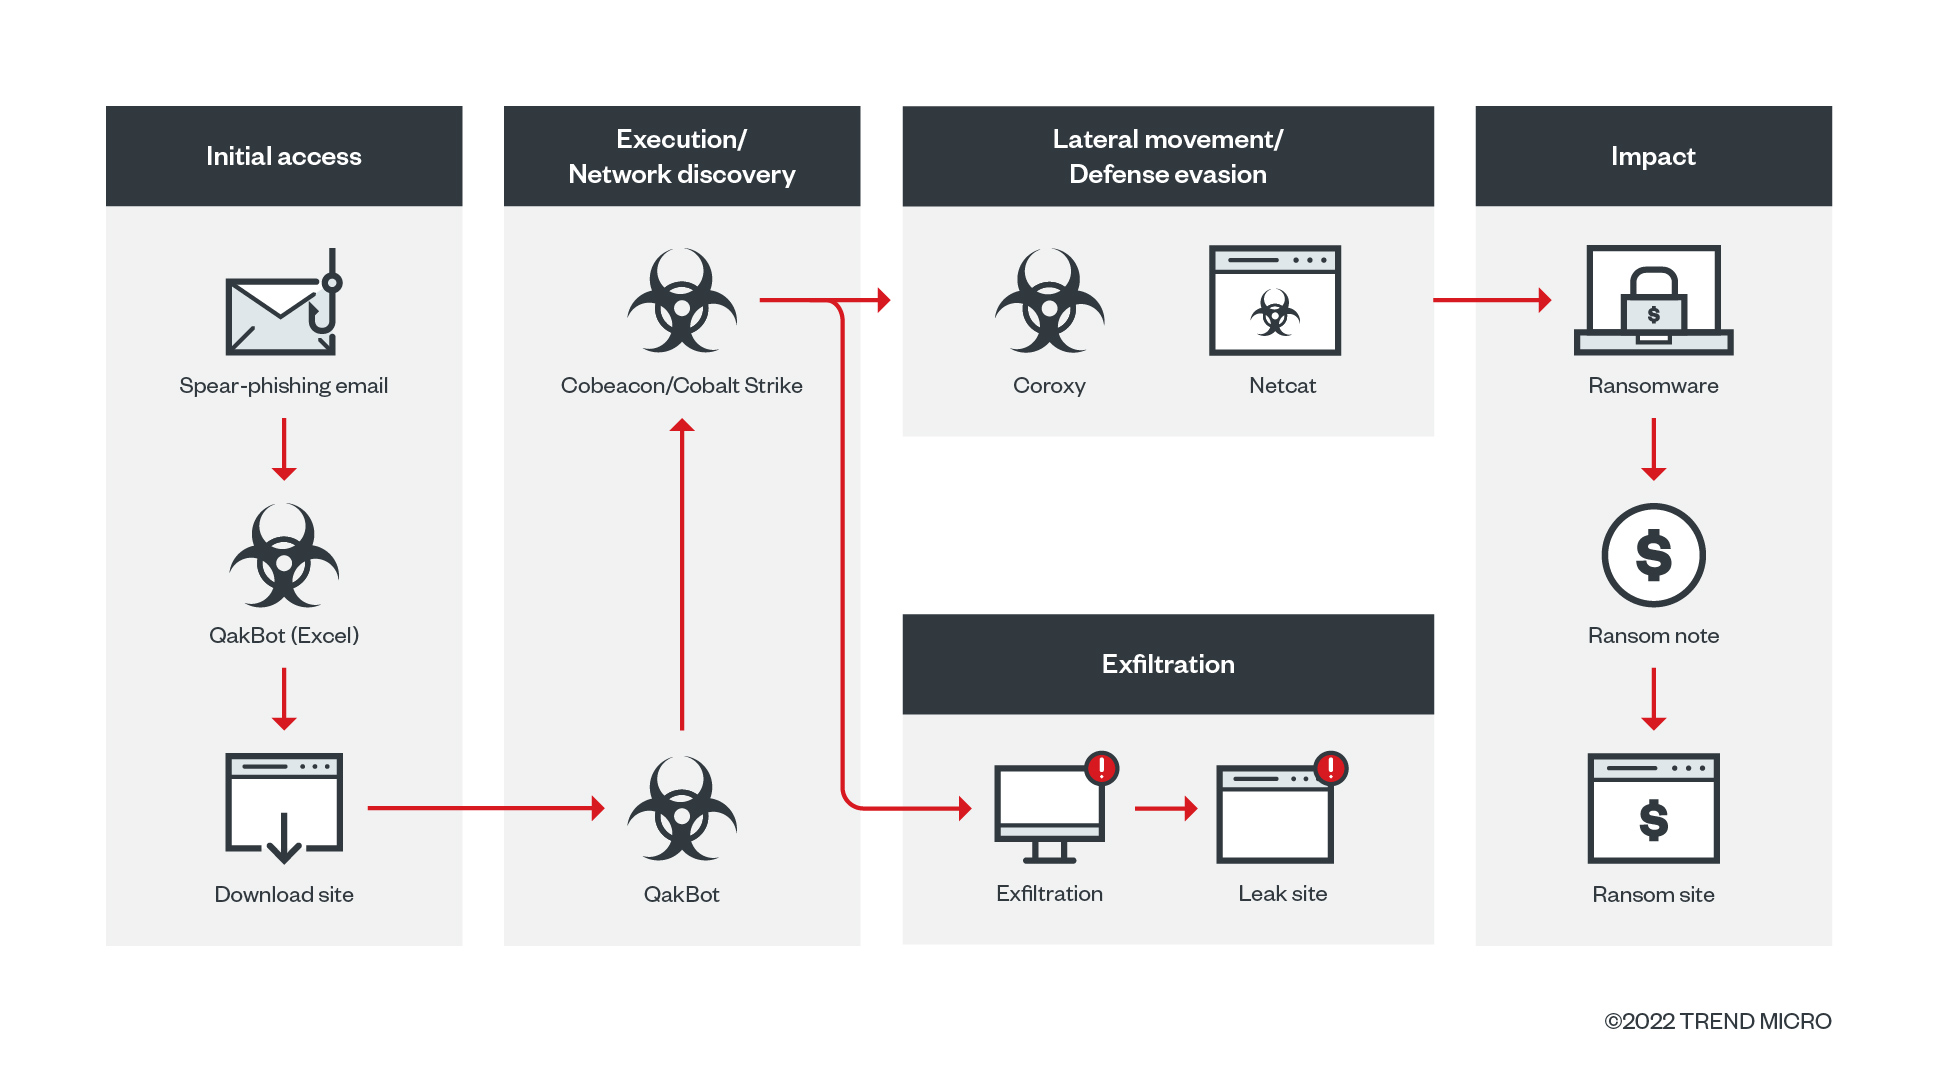 Figure 2. The infection chain from the point of entry to the Black Basta ransomware payload